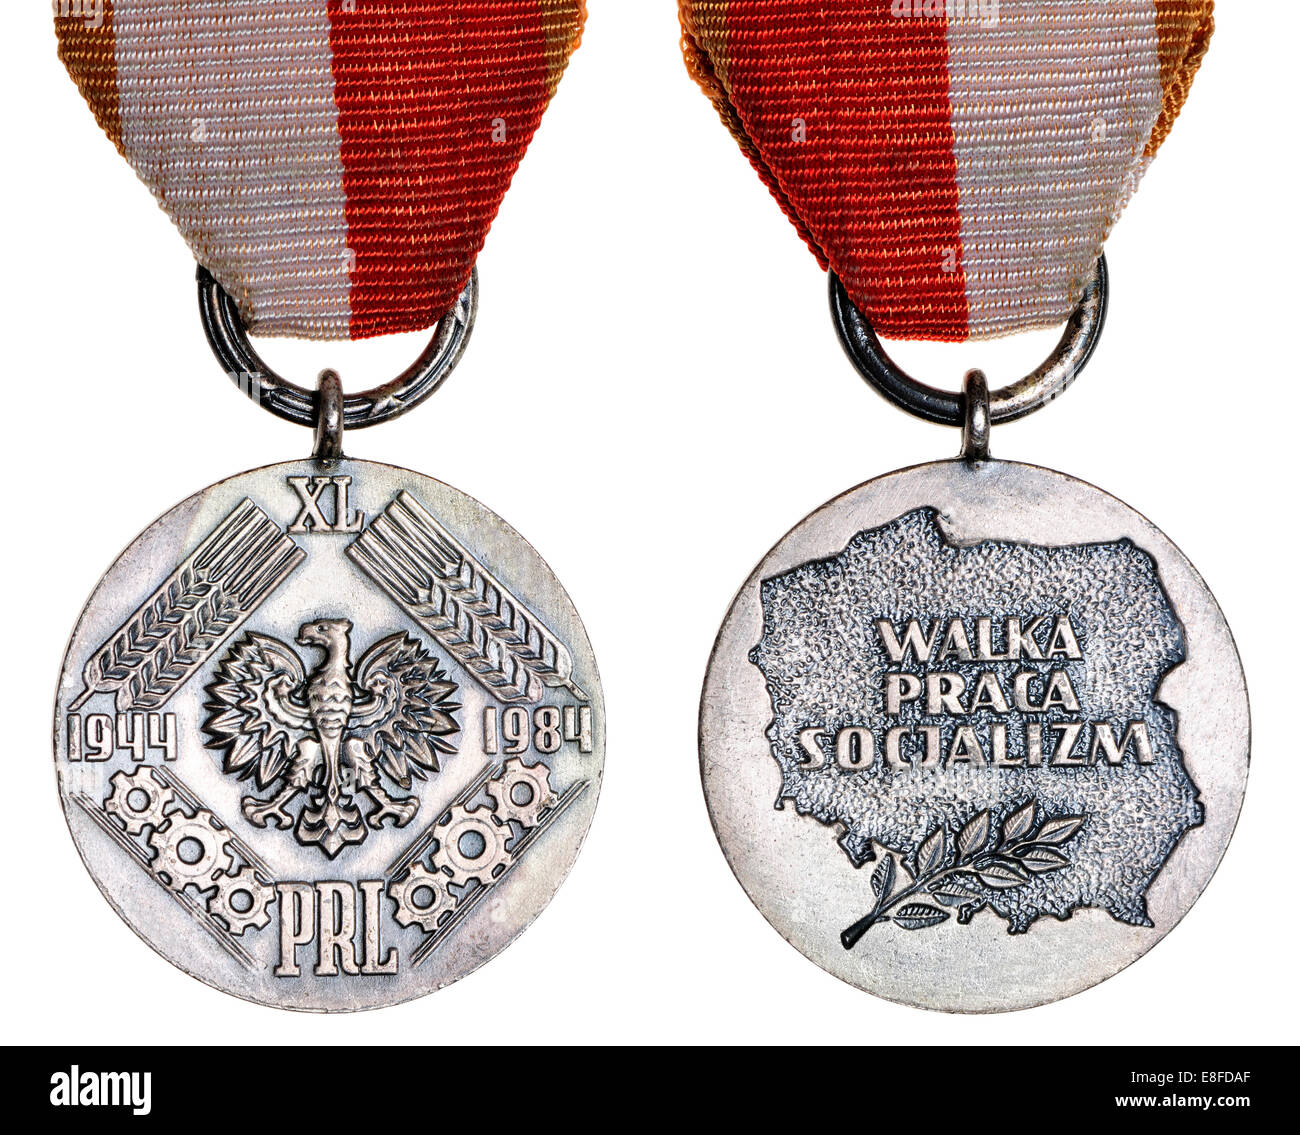 Polish medal commemorating the 40th anniversary of the People's Republic of Poland (1944-84) Stock Photo